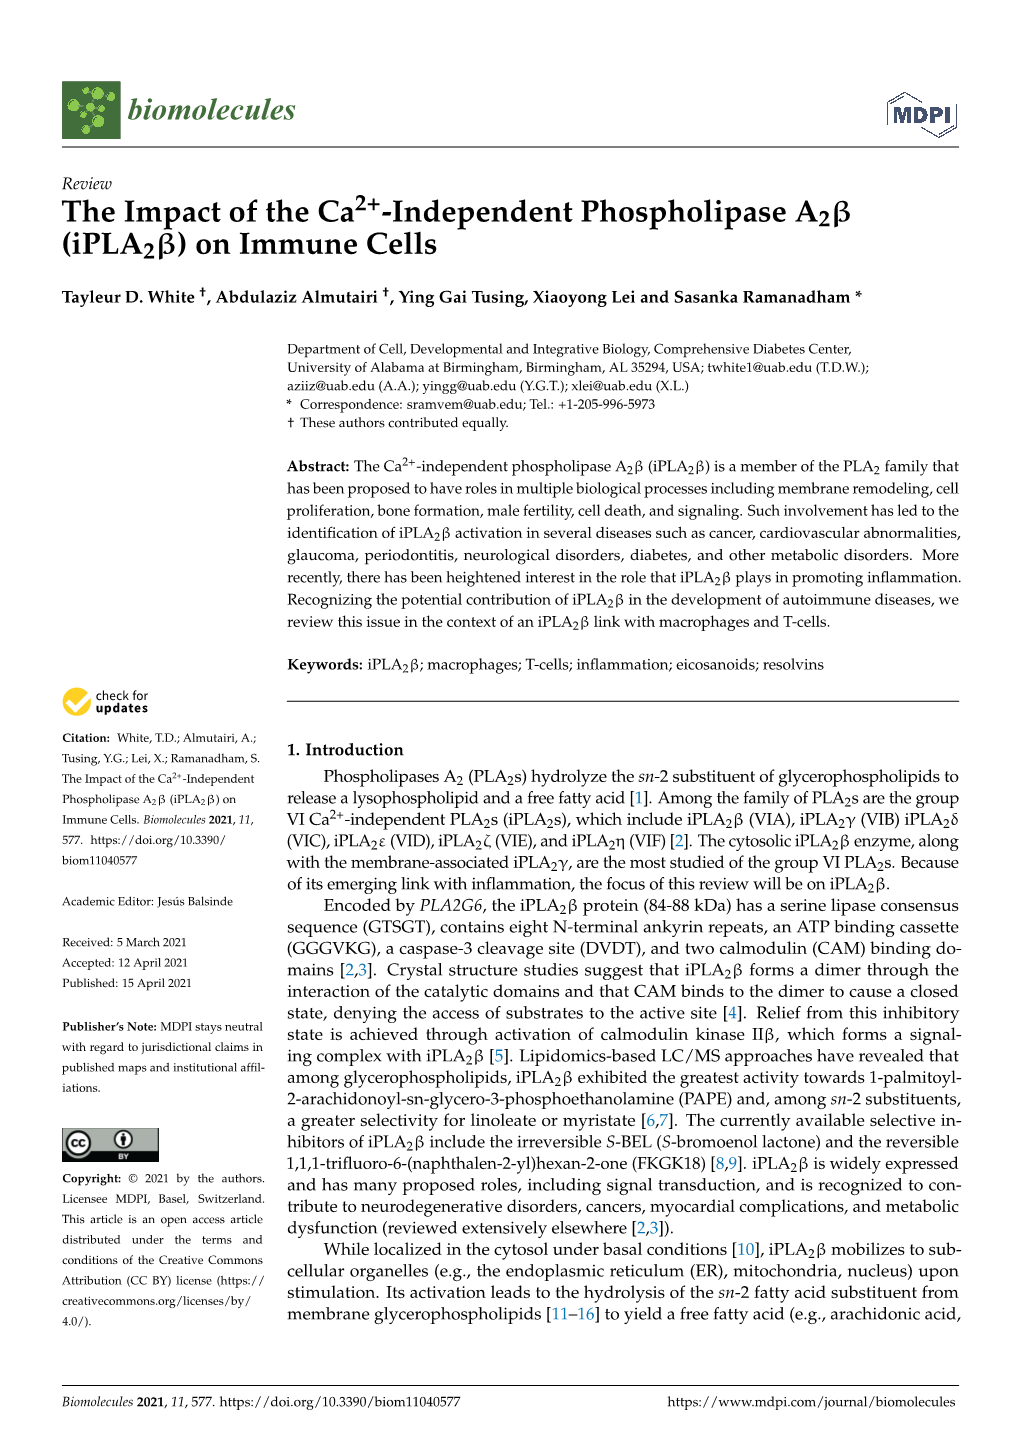 The Impact of the Ca2+-Independent Phospholipase A2 (Ipla2) on Immune Cells